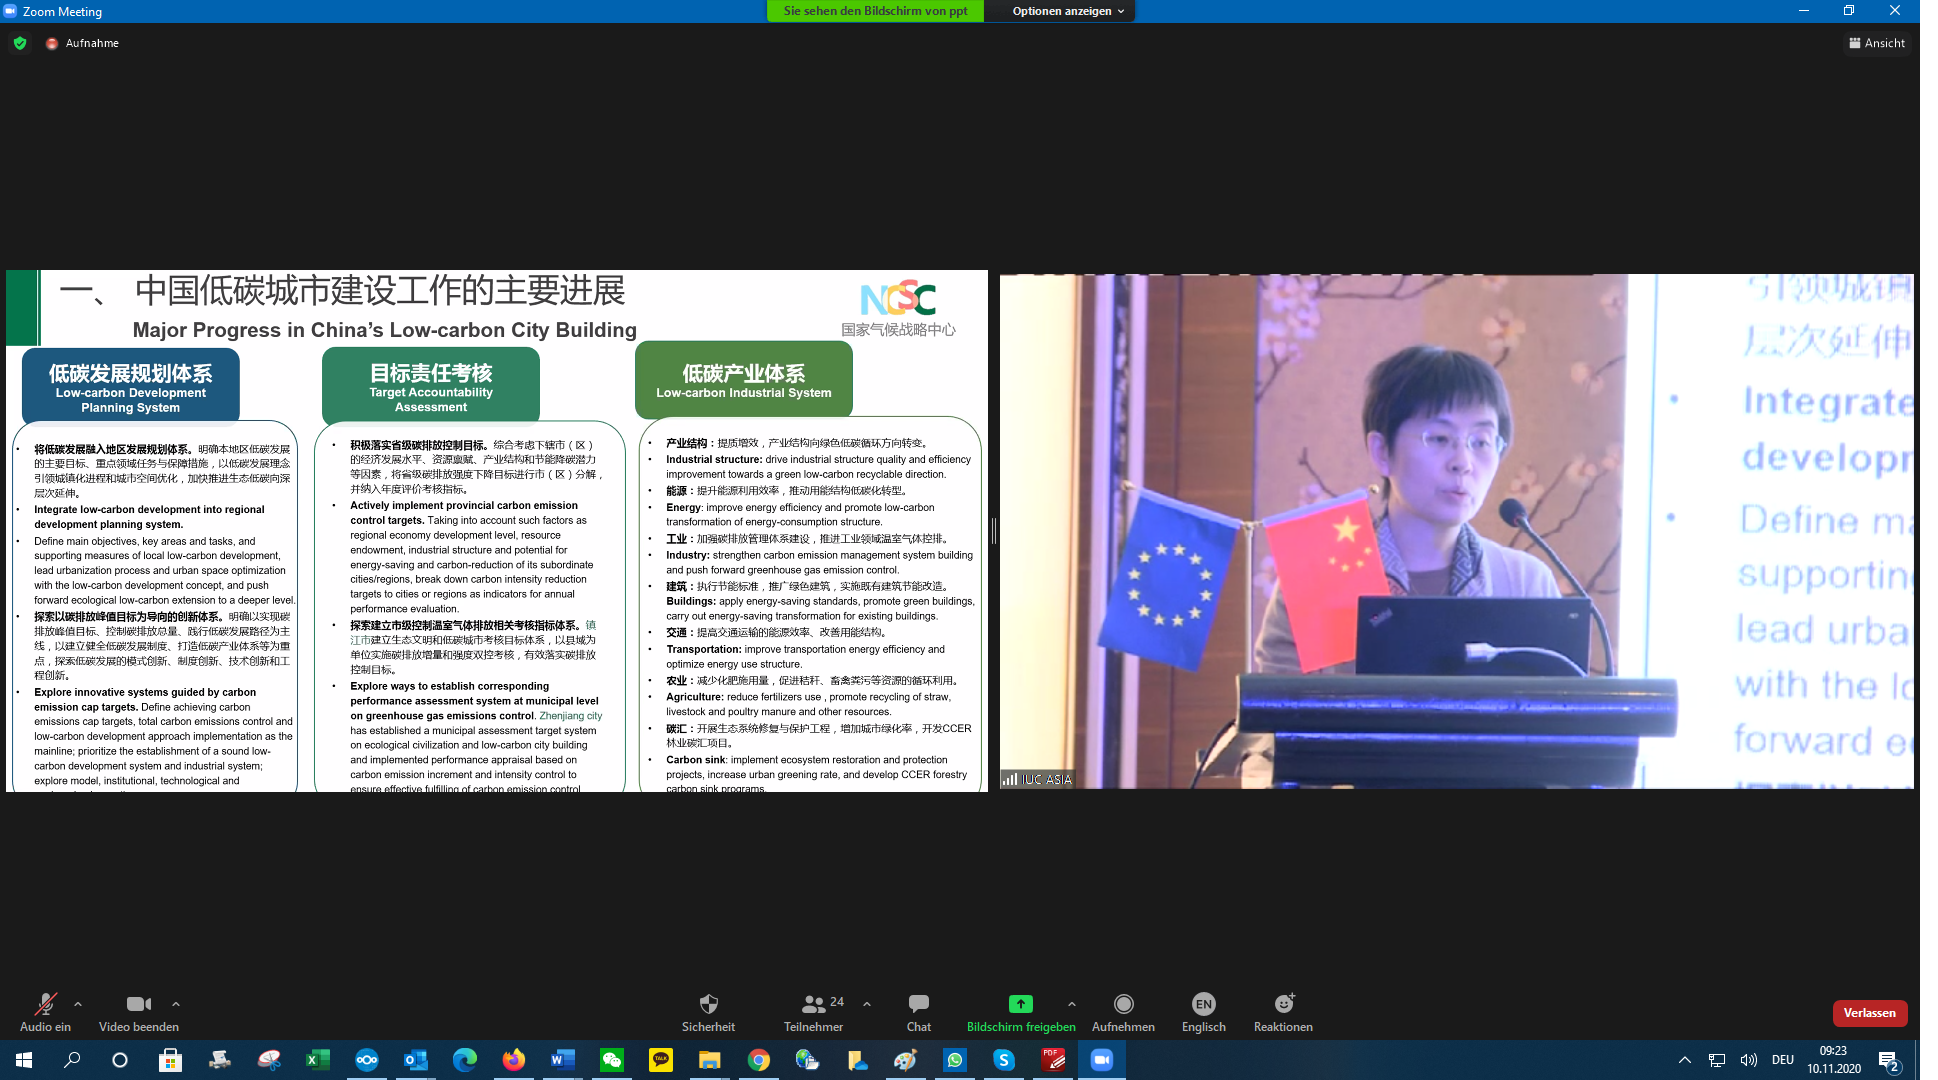 Webinar “EU-China Cities Transition Towards Low Carbon: Achievements, Challenges and Future Pathways”